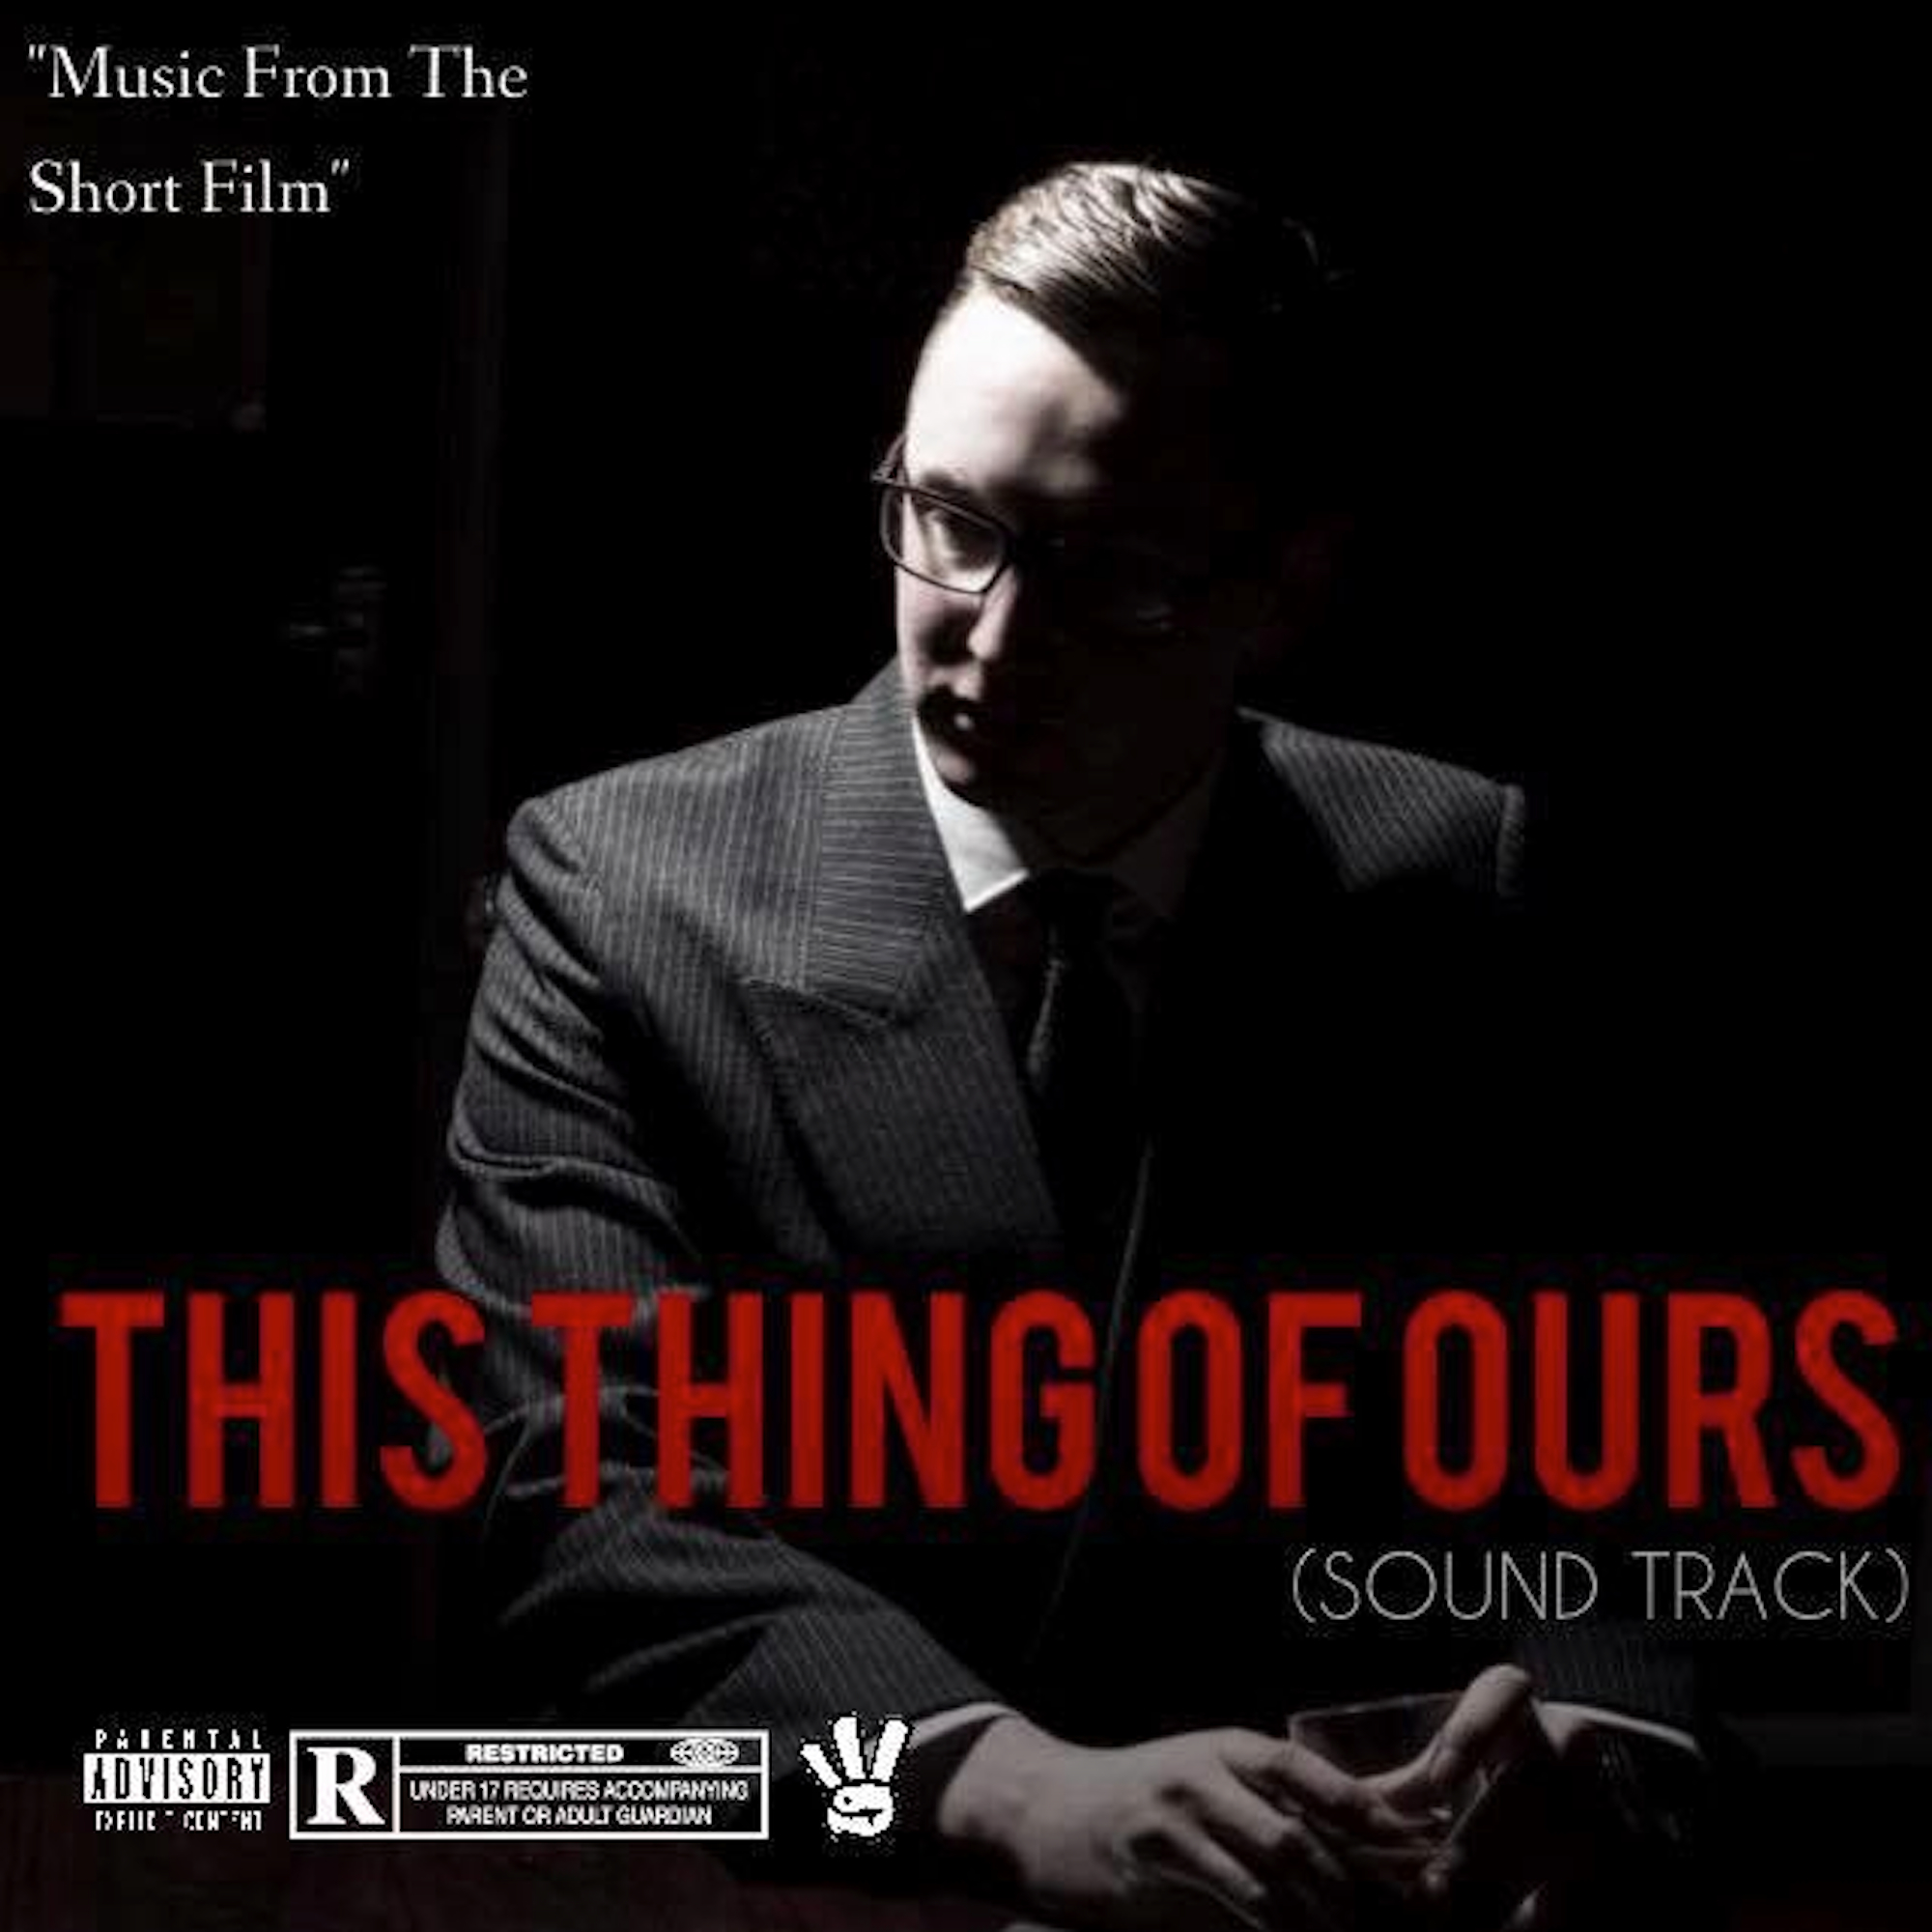 Consequences Music from Short Film " This Things of Ours